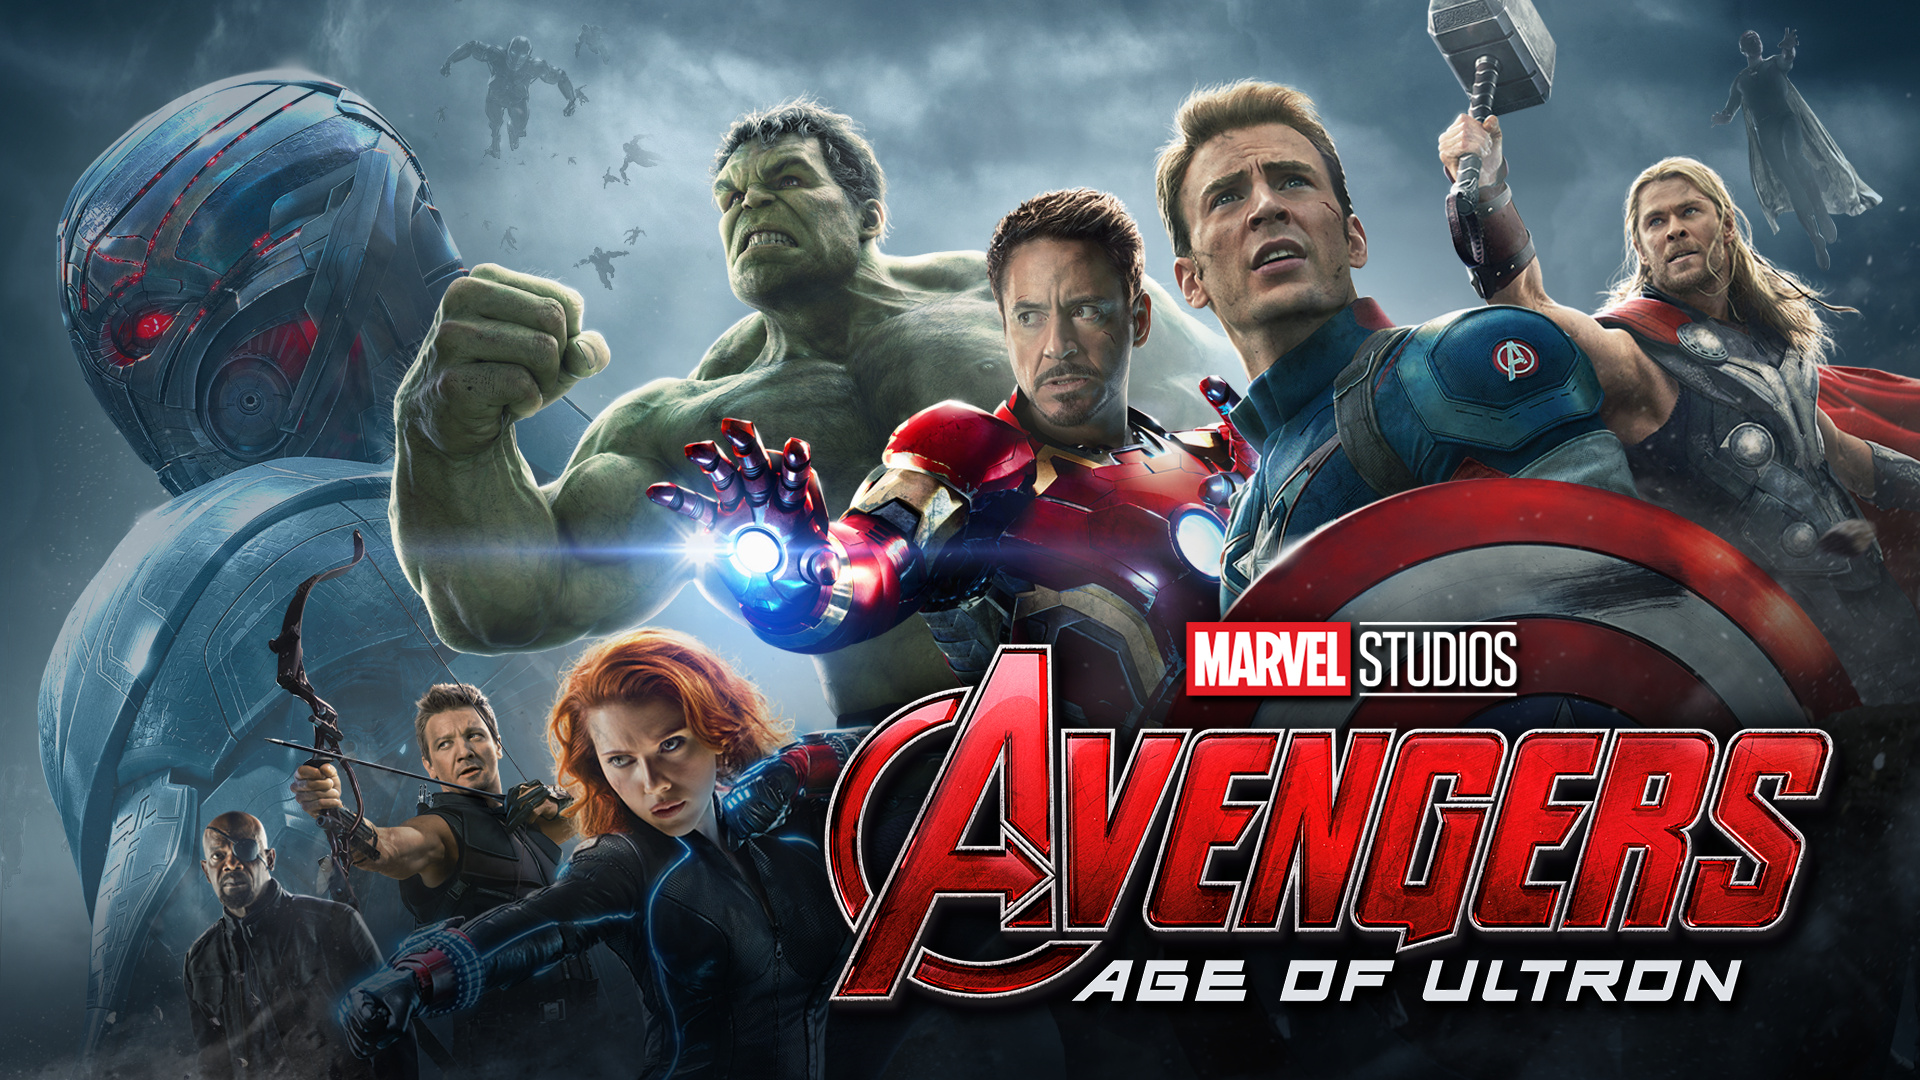 Avengers: Age of Ultron, Defending the movie, Fan discussions, Popularity debate, 1920x1080 Full HD Desktop